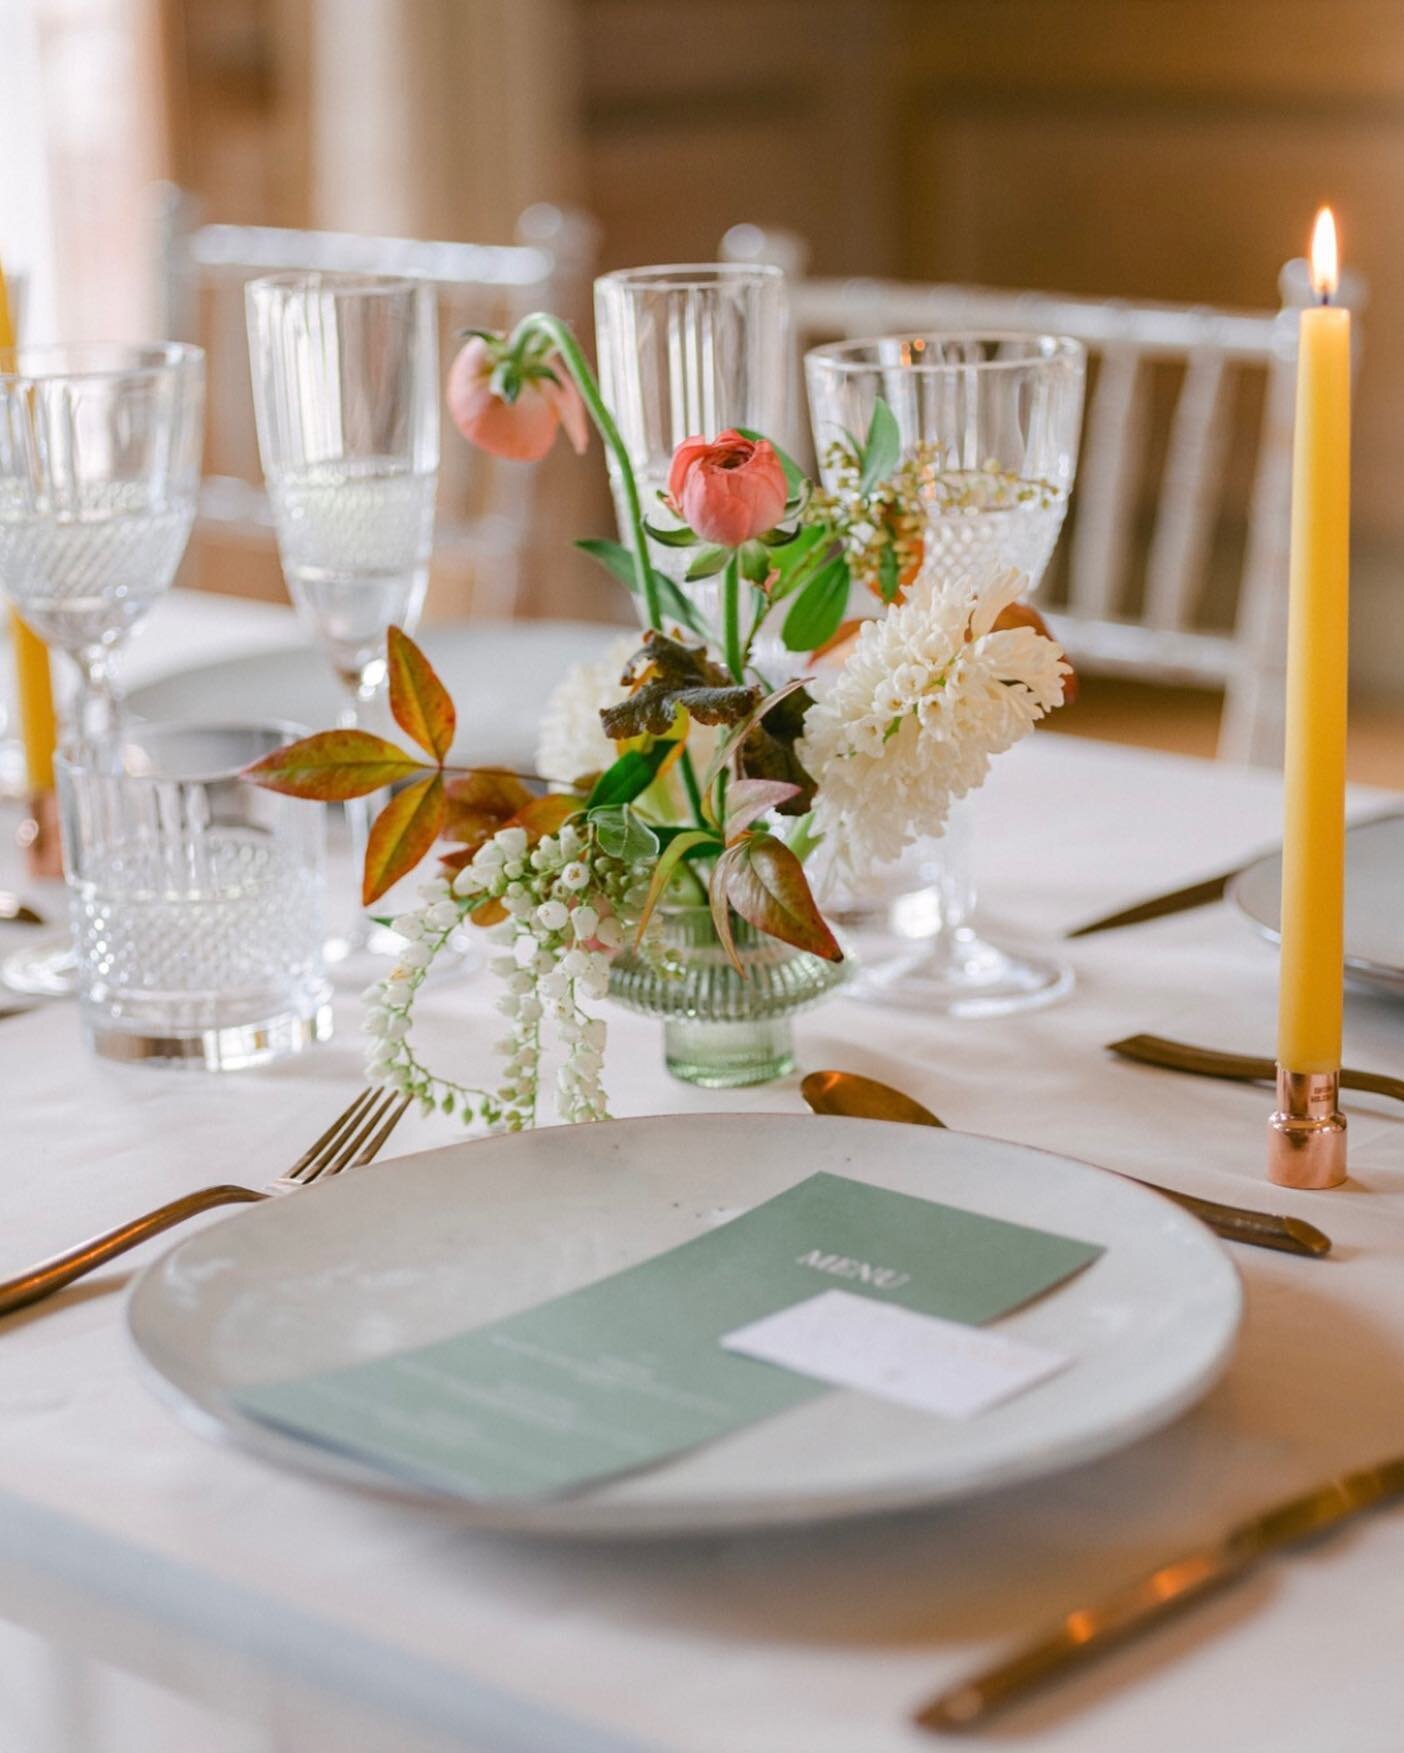 We just 🧡 making cute table arrangements! This one is captured on film by @natalielucy.photography at @findon_place featured on @lovemydress ✨ 
.
.
.
.
#minimalistwedding #sussexflorist #londonflorist #floralstories #sussexwedding #stylingtheseasons